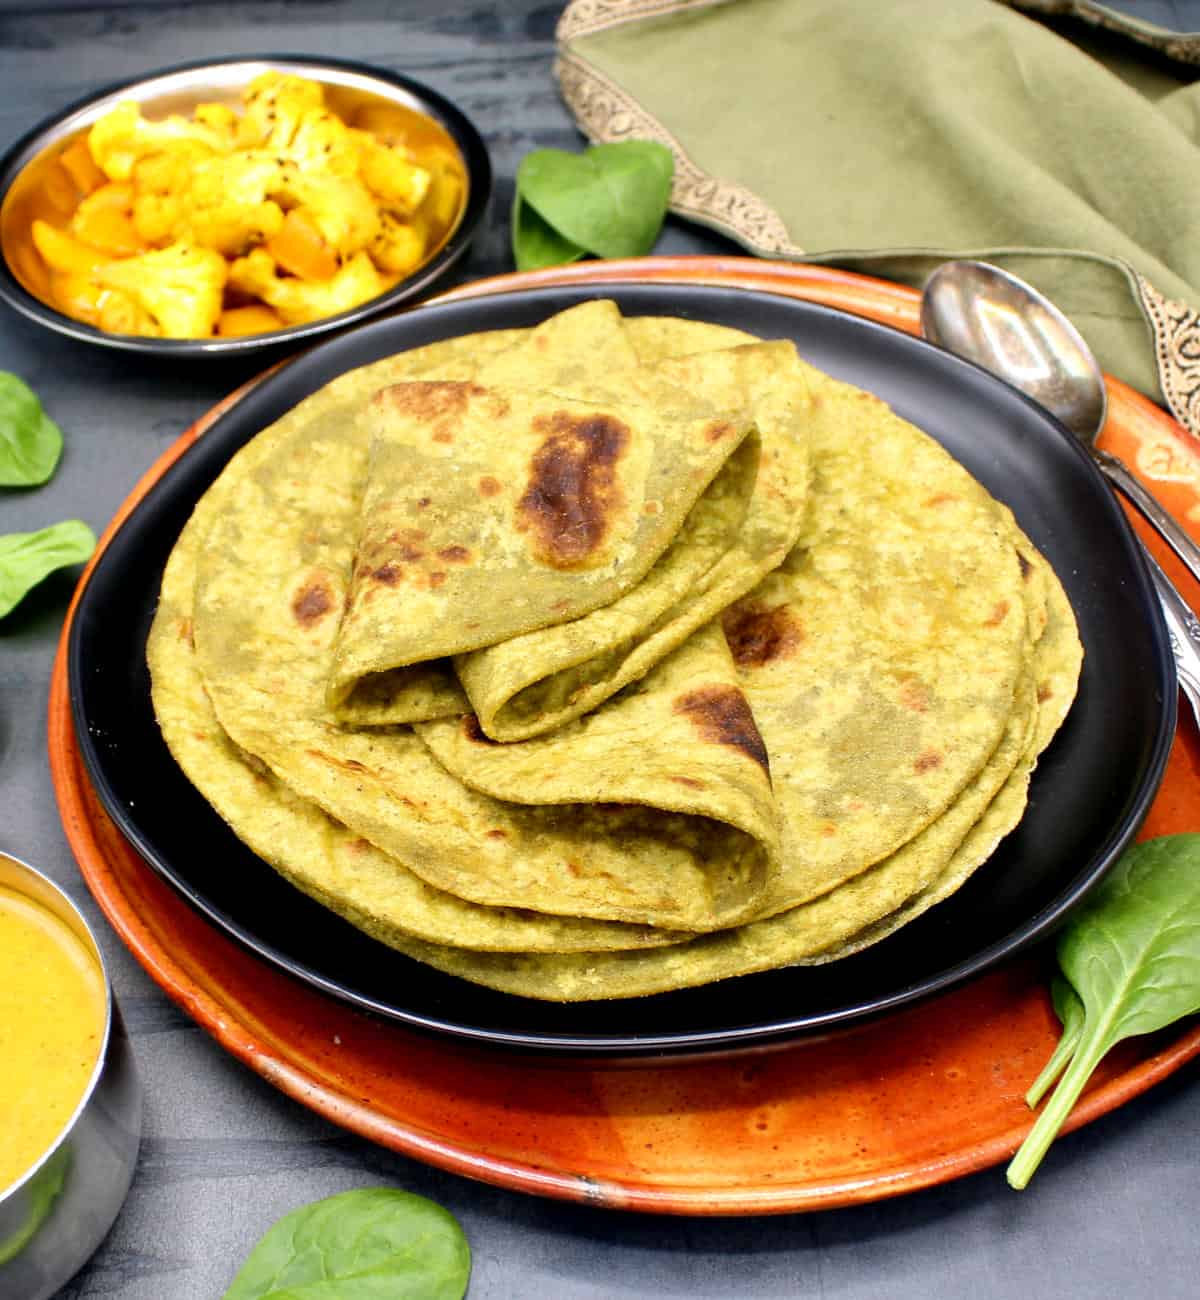 High-protein roti on black plate with dal and sabzi on side.